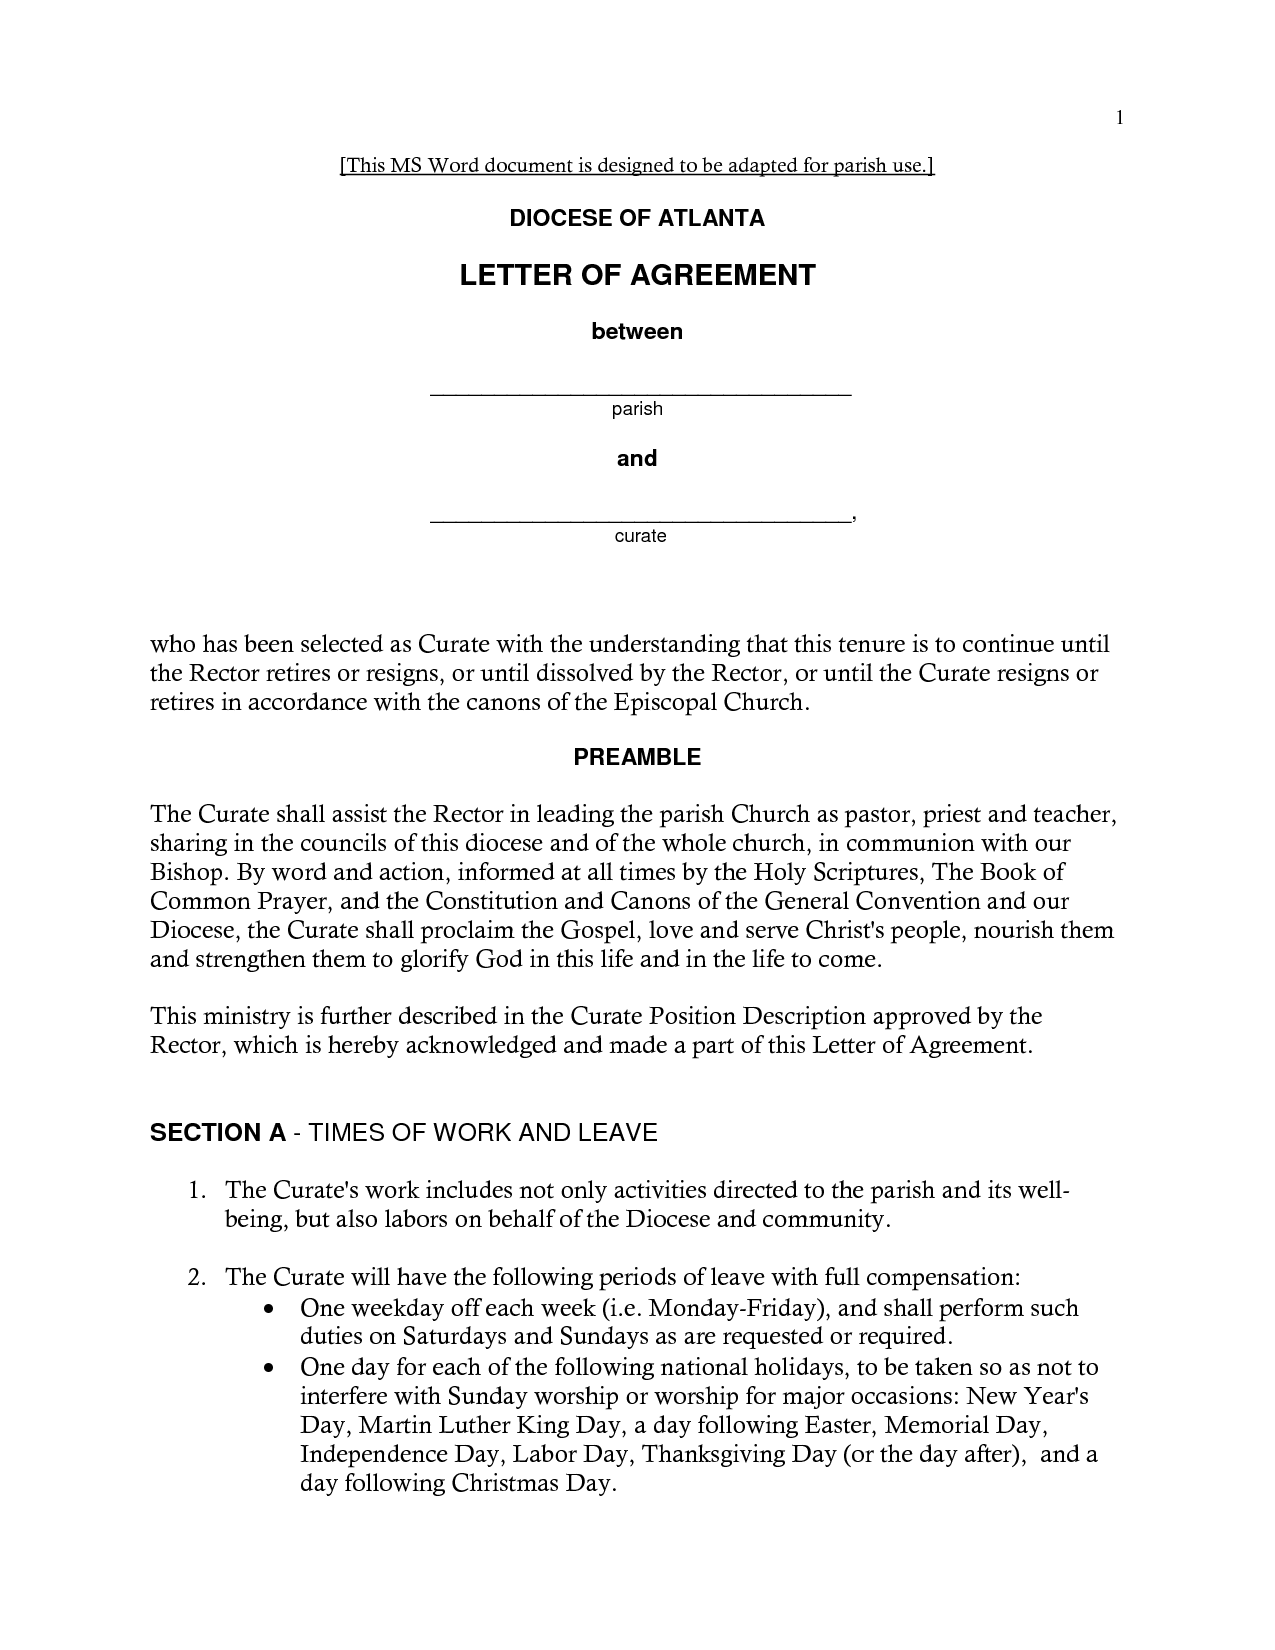 loan agreement letter template individual loan agreement template 